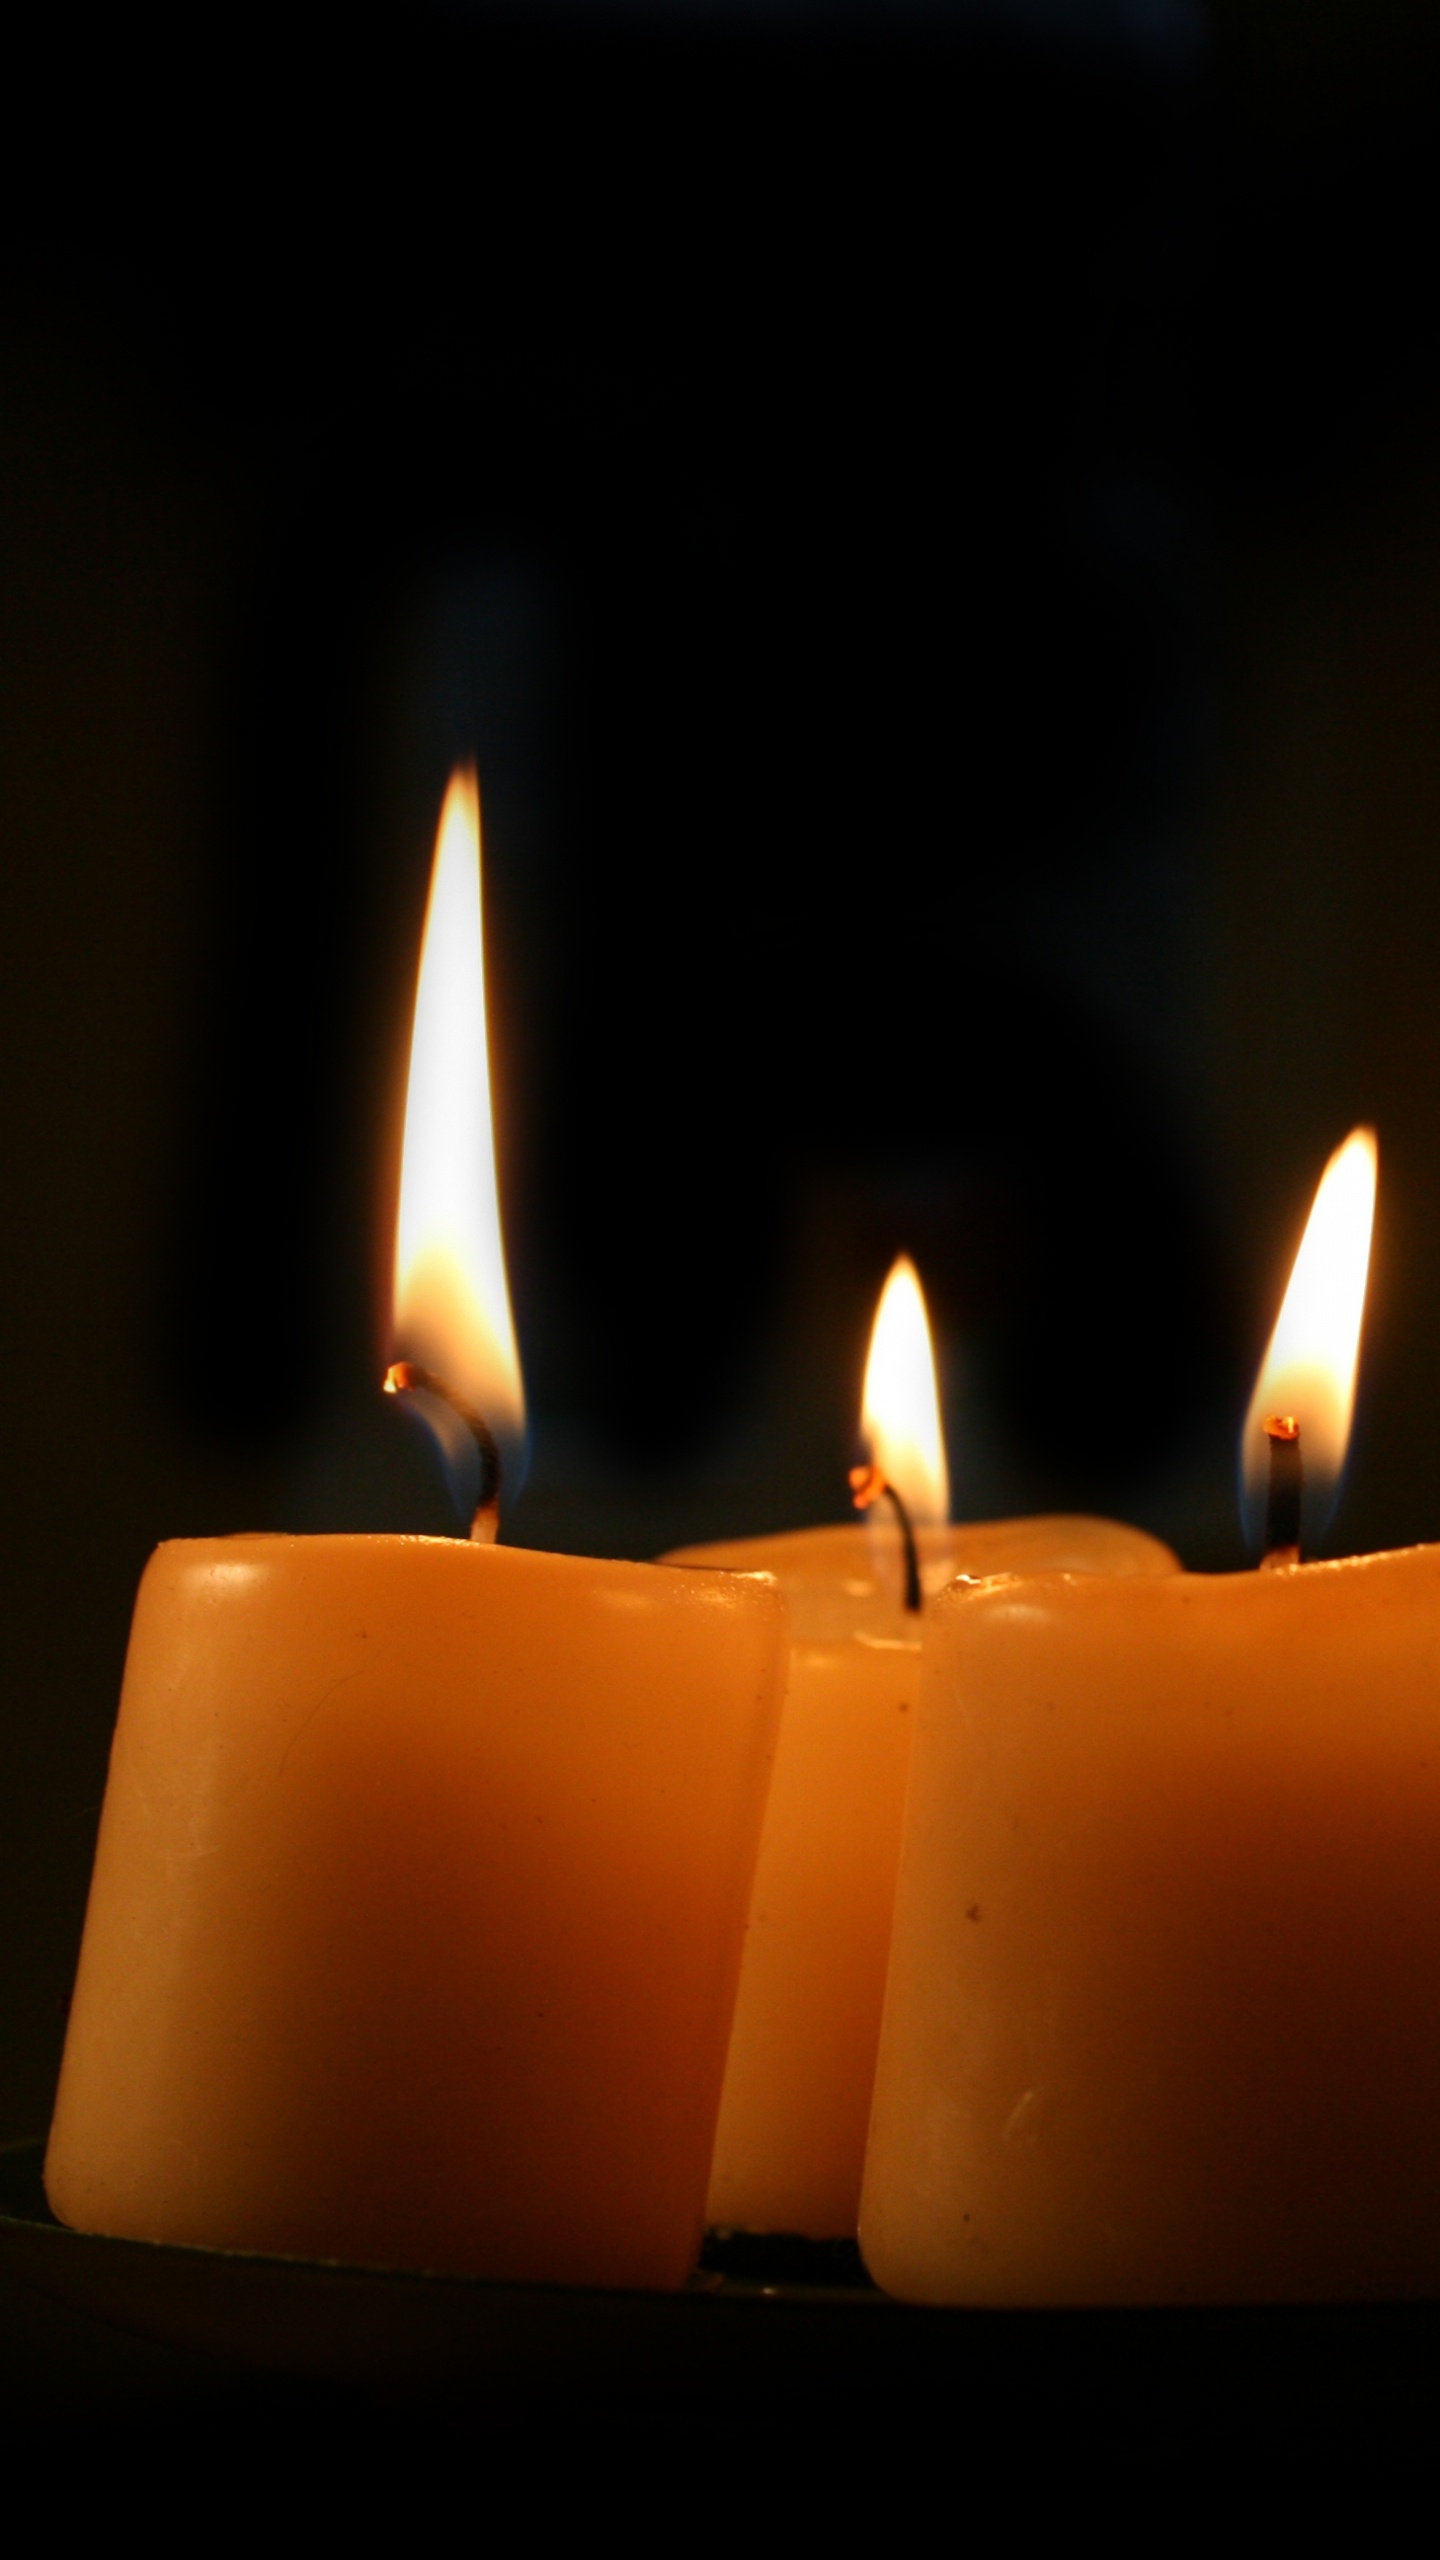 3 Lighted Candles on Black Background. Wallpaper in 1440x2560 Resolution